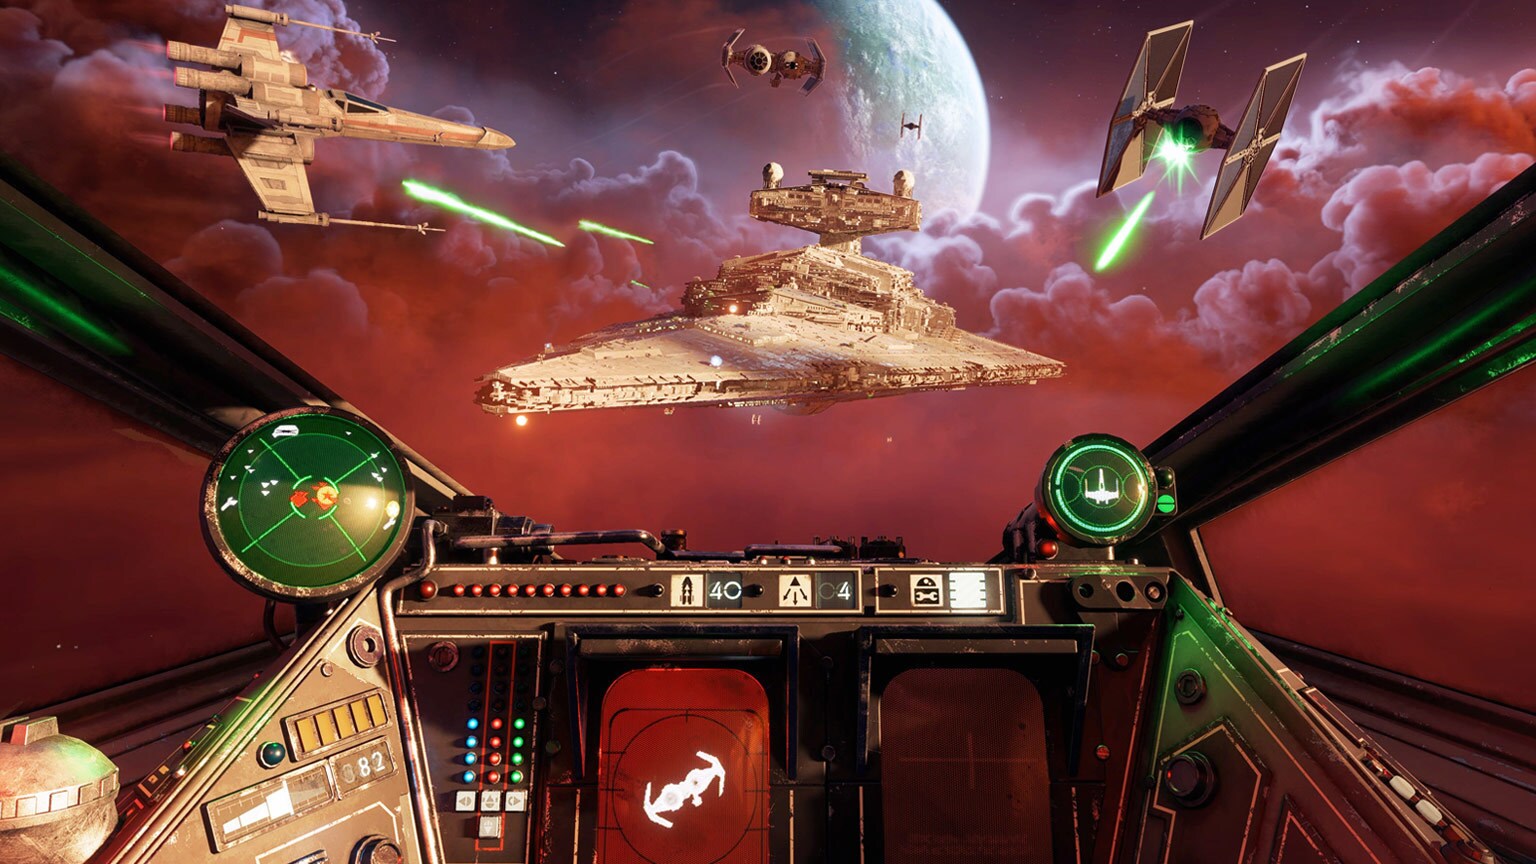 7 Insights and Things to Know About Star Wars: Squadrons